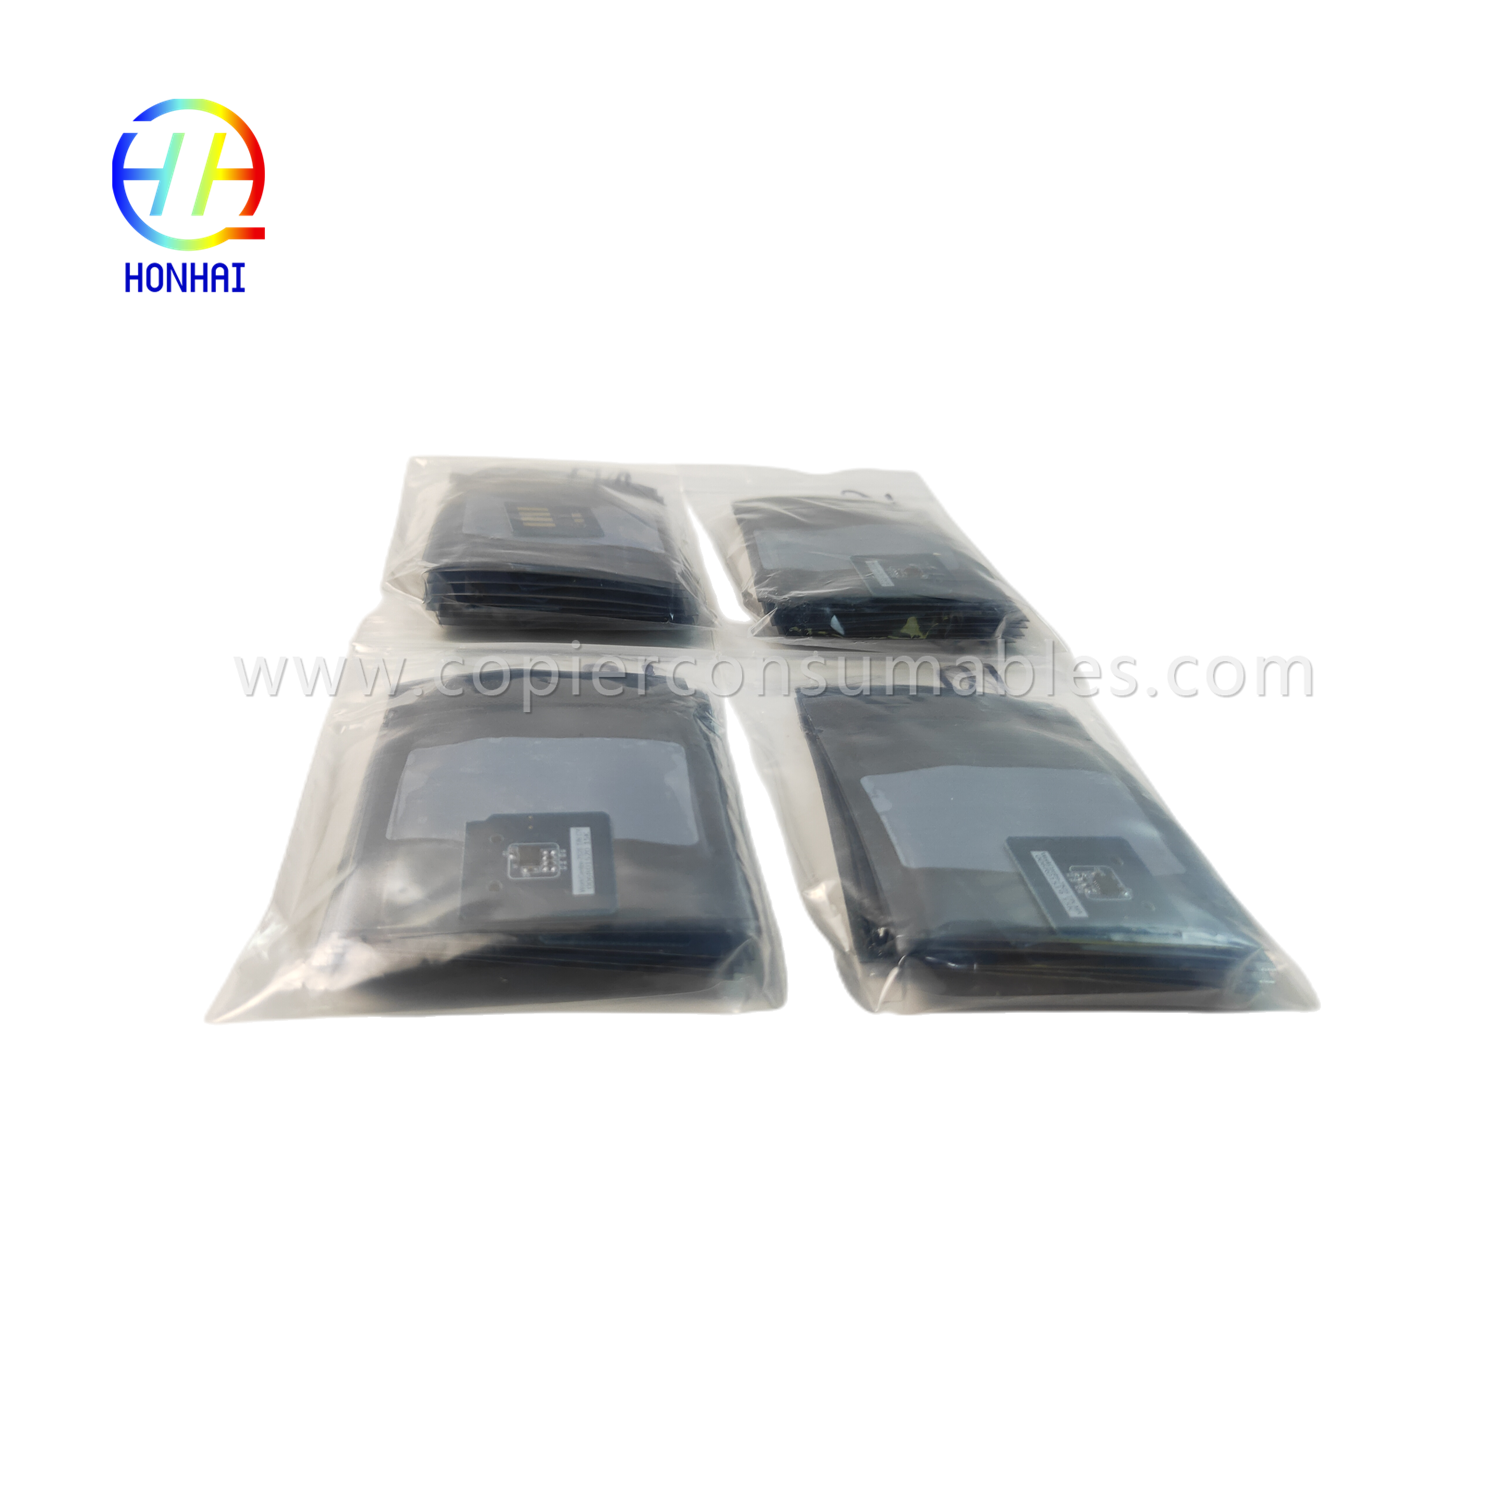 Toner Chip (set) for Xerox 7525 7530 7535 7830 7835 7845 7855 006R01517 006R01518 006R01519 006R01520 Chip  (3)_副本